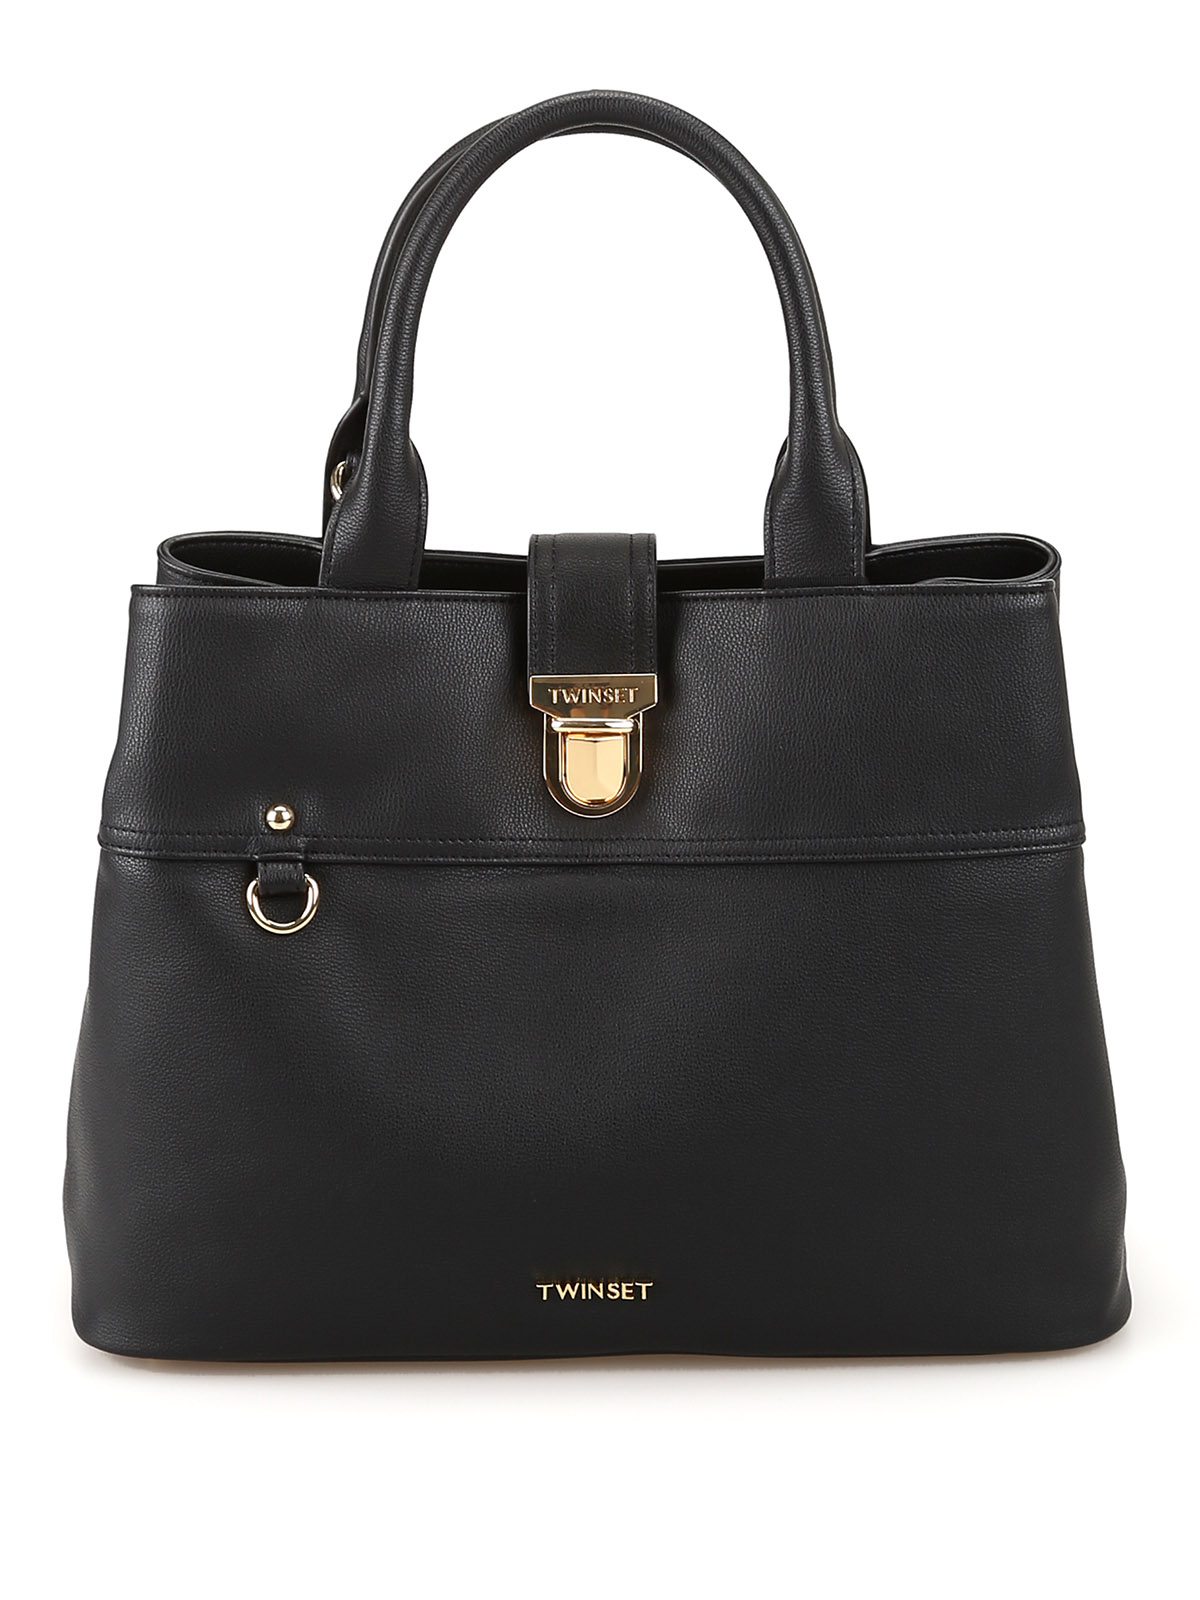 Totes bags Twinset - Black faux leather tote bag - 192TA713100006